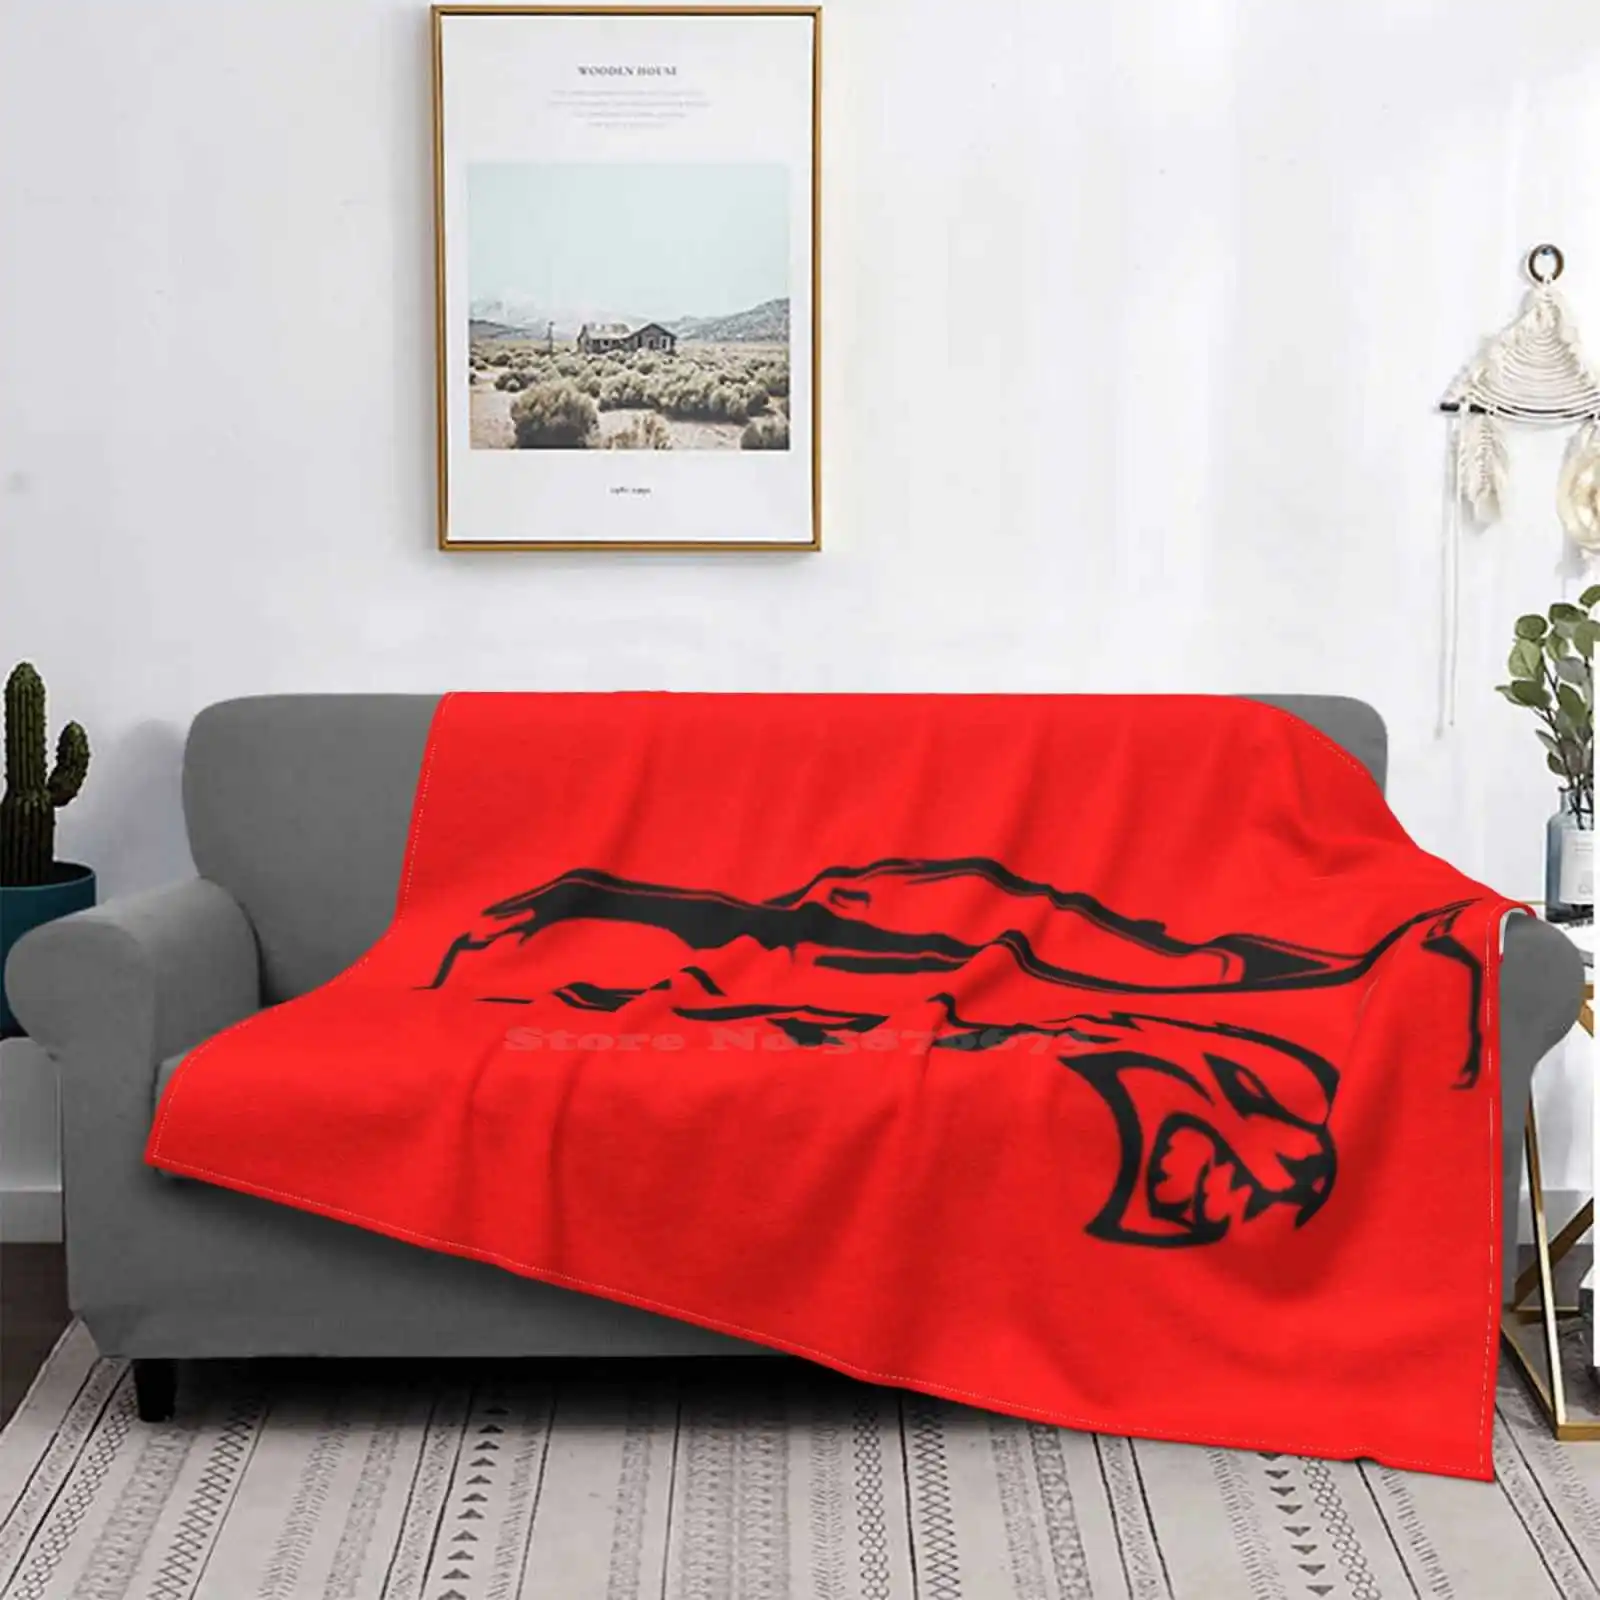 

US Air Force Blanket Comfort Warm Soft Cozy Throw Blanket Air Wash for Boys Teens Adults Gift,Bedding Decor Conditioning Machine